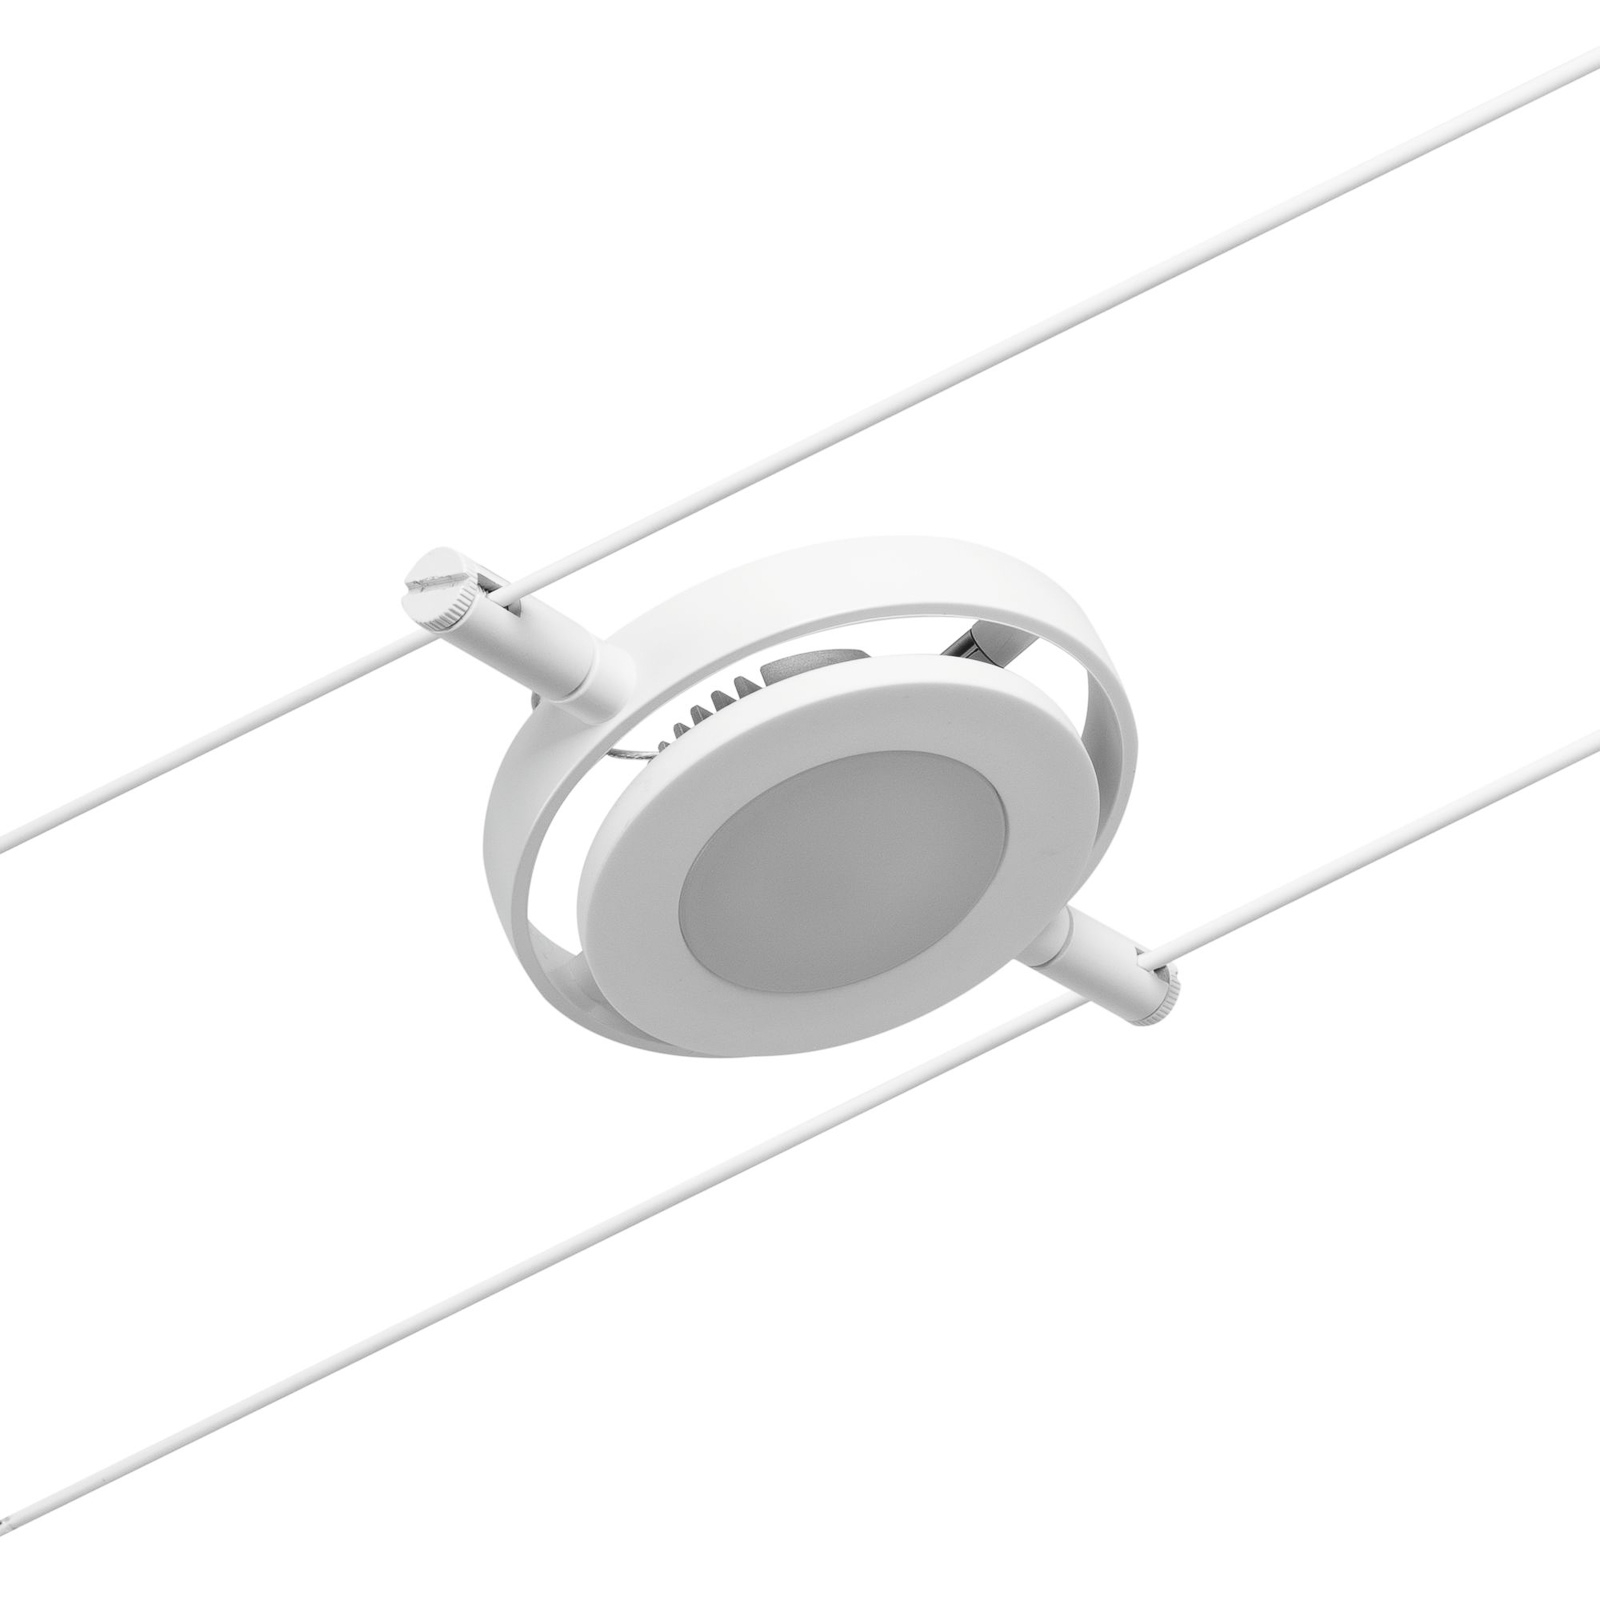 Paulmann Wire RoundMac spot for cable system white